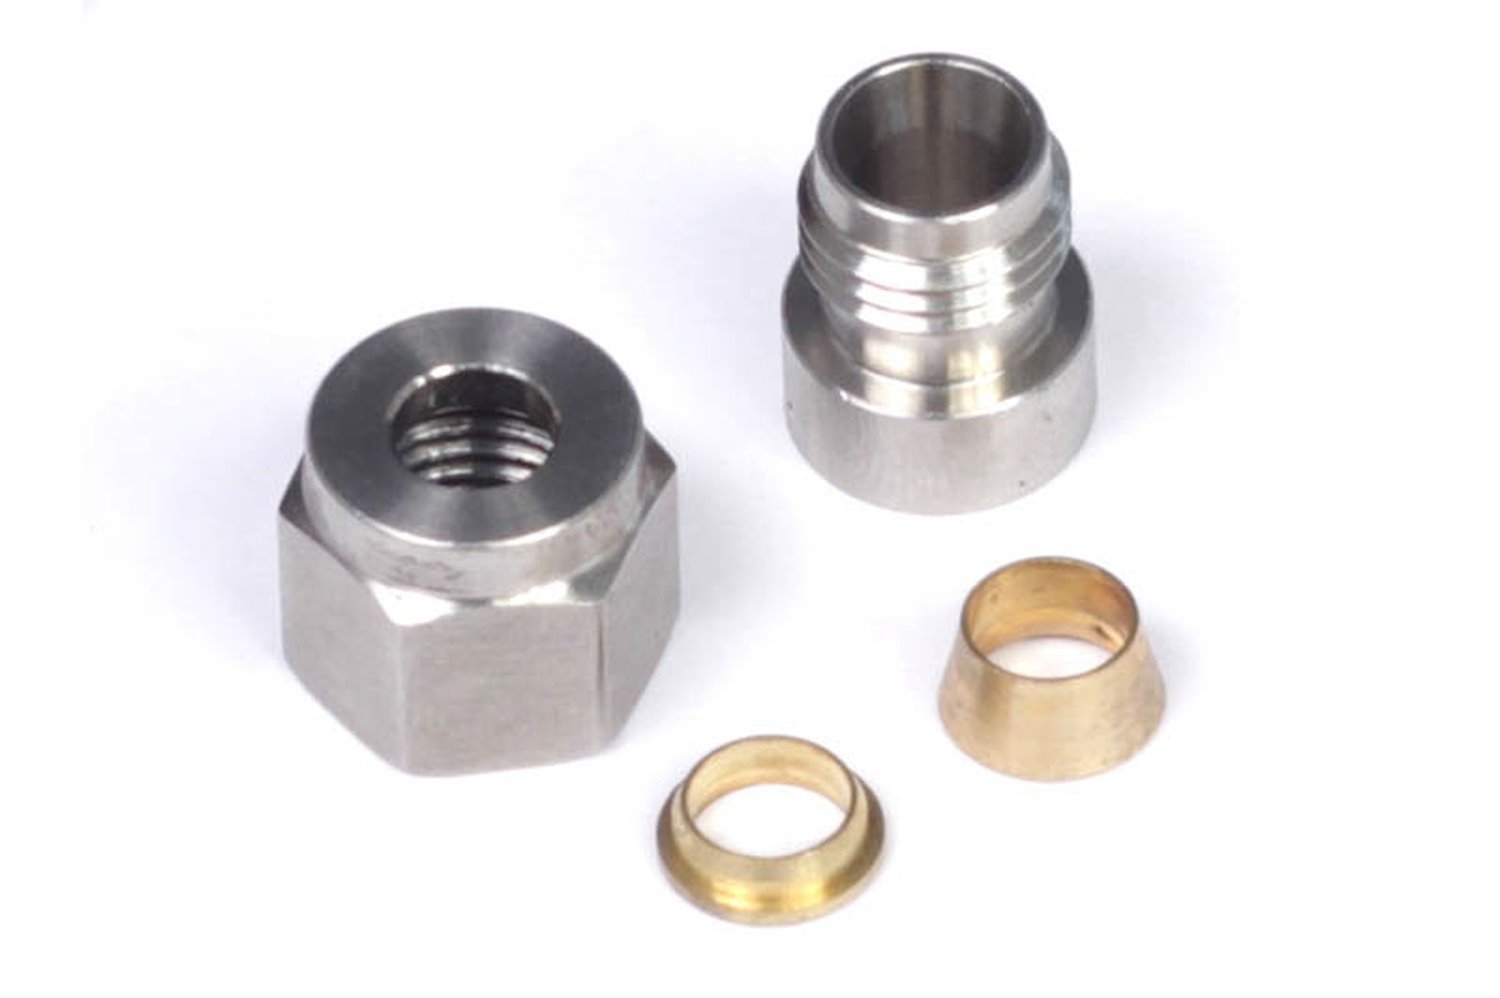 HT-010812 1/4 in. Stainless Steel Weld-On Kit, Includes Nut and Ferrule